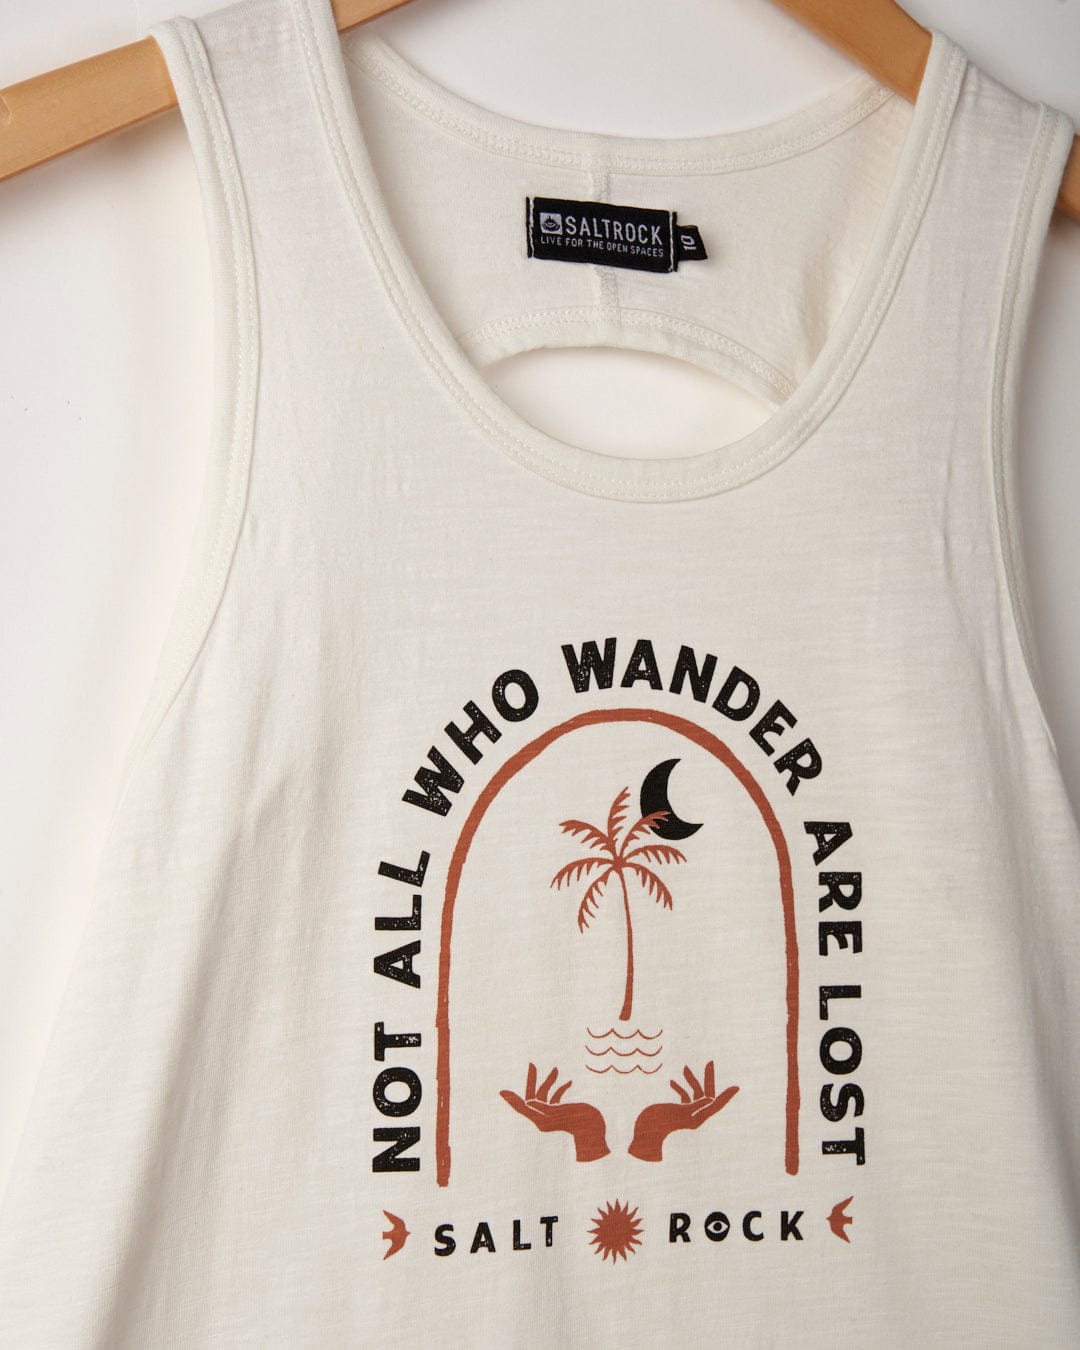 Saltrock Palmera - Womens Vest - White featuring "not all who wander are lost" print, with palm tree and wave graphics, displayed on a wooden hanger.